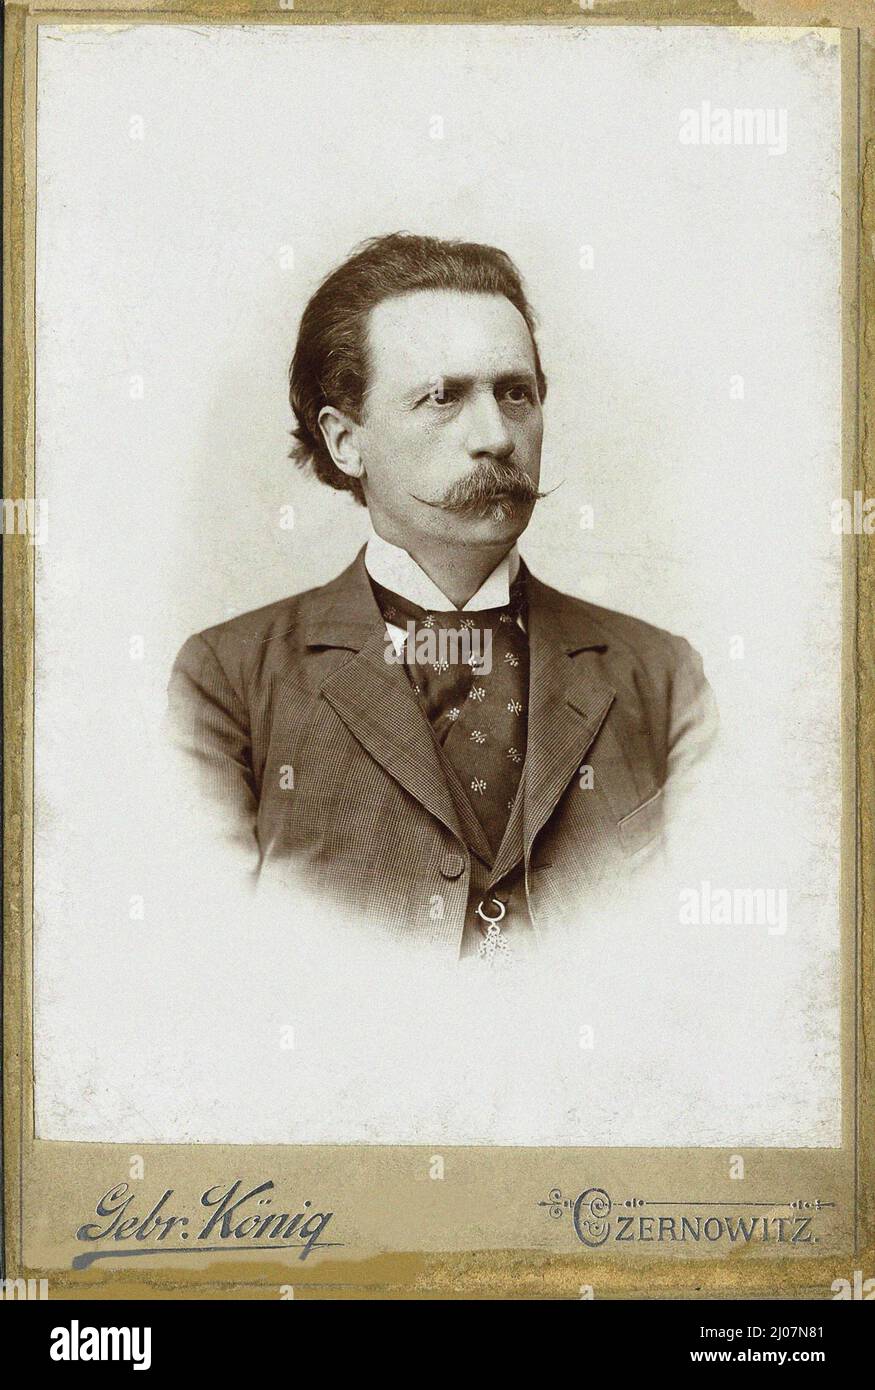 Portrait of the composer, violinist and conductor Vojtech Hrimaly (1842-1908). Museum: PRIVATE COLLECTION. Author: Czernowitz Photo studio Gebr. König. Stock Photo